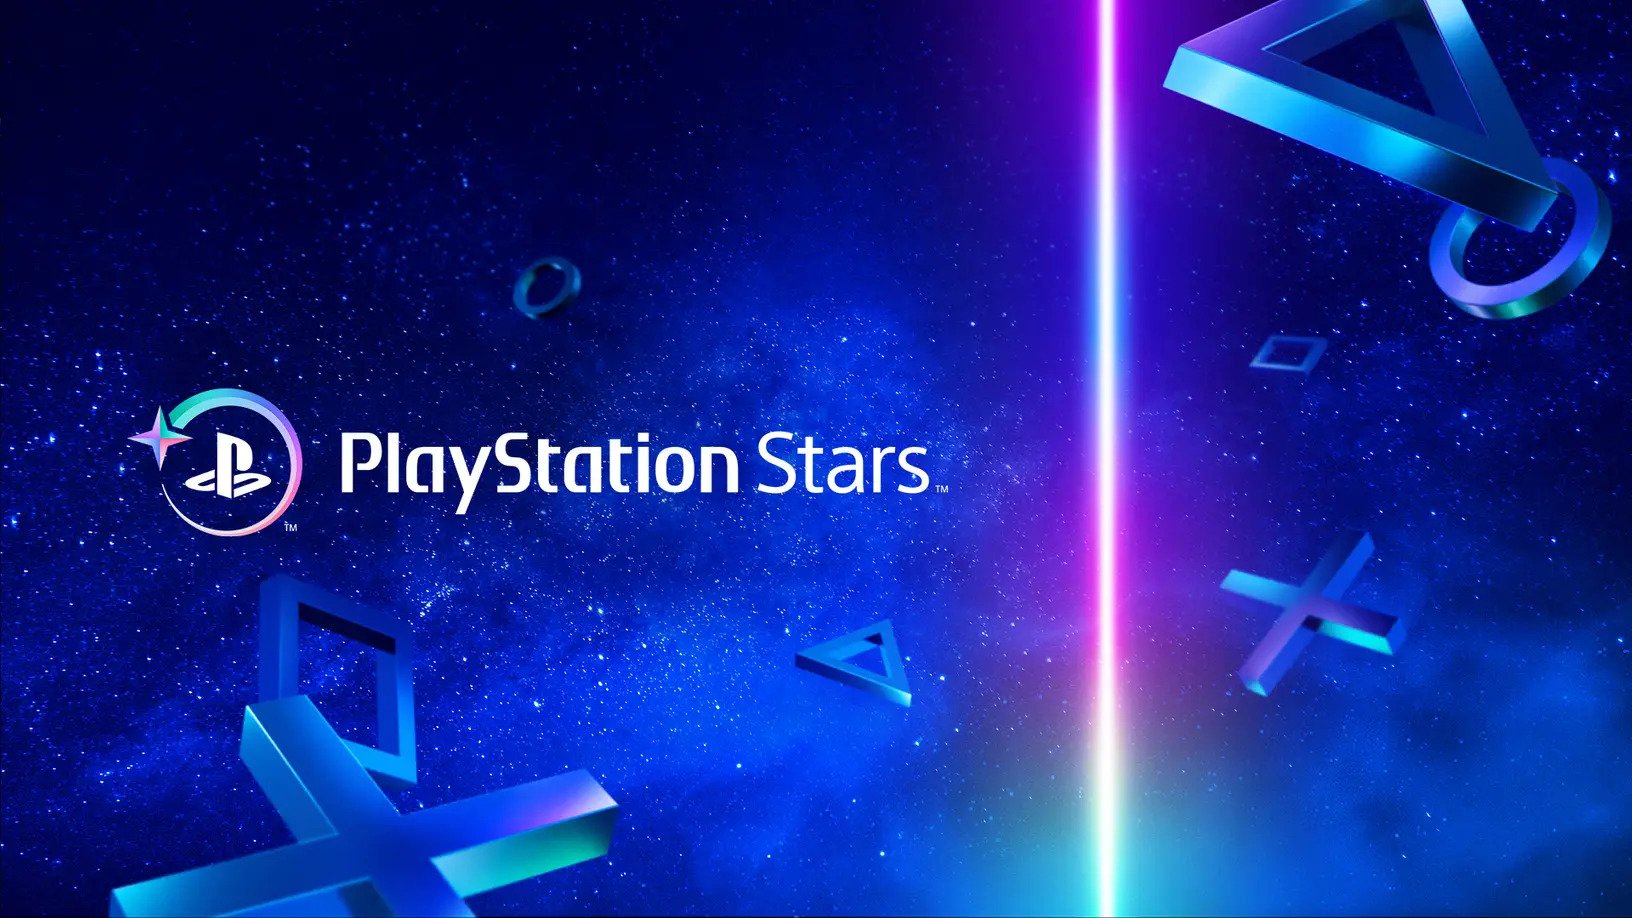 Sony offers the first look at the PlayStation Stars loyalty